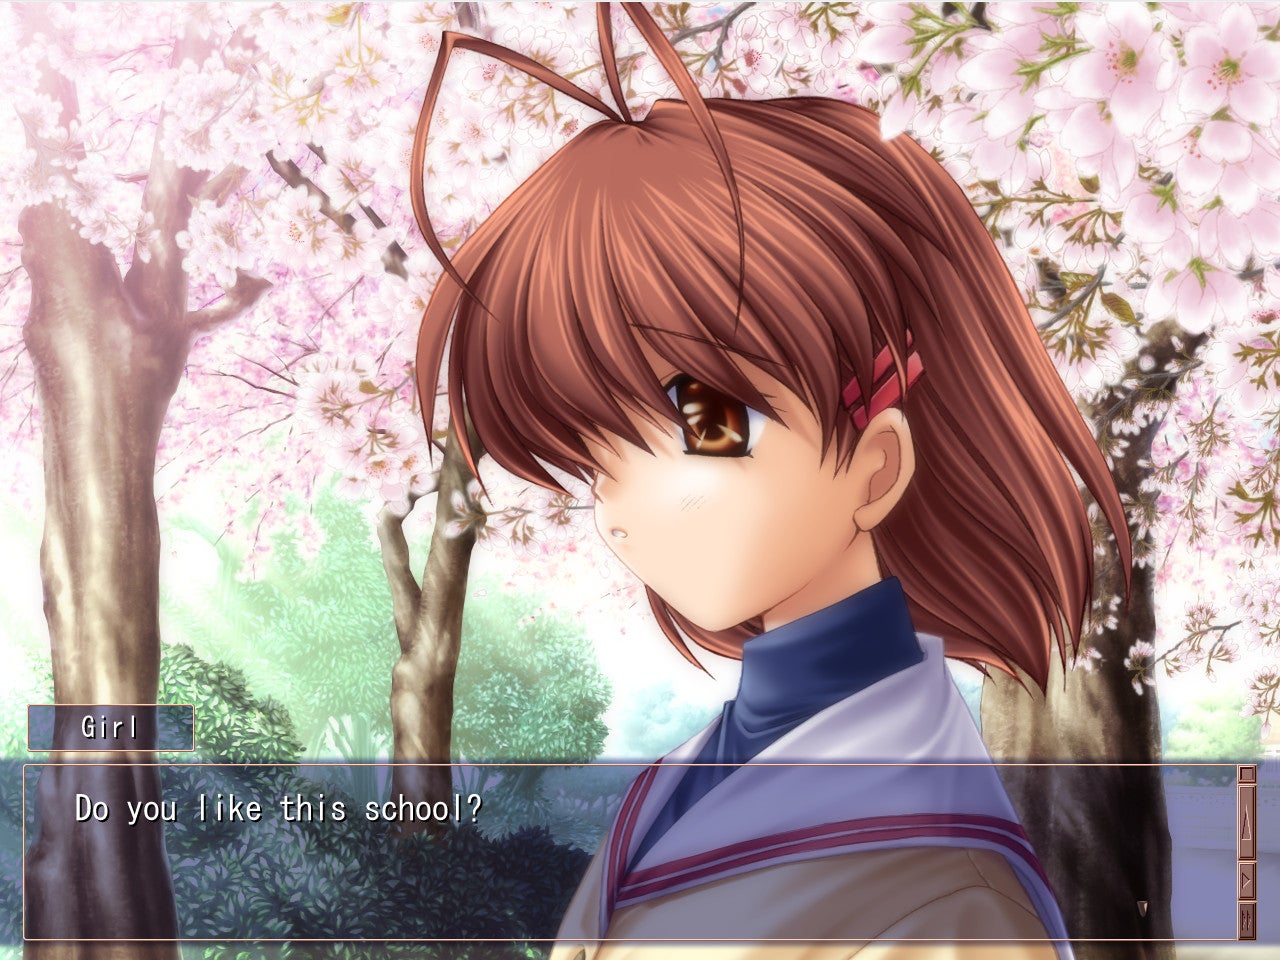 Nagisa (identified as "Girl") asks Tomoya if he likes school while standing under the cherry blossom trees, as part of their first interaction in Clannad.